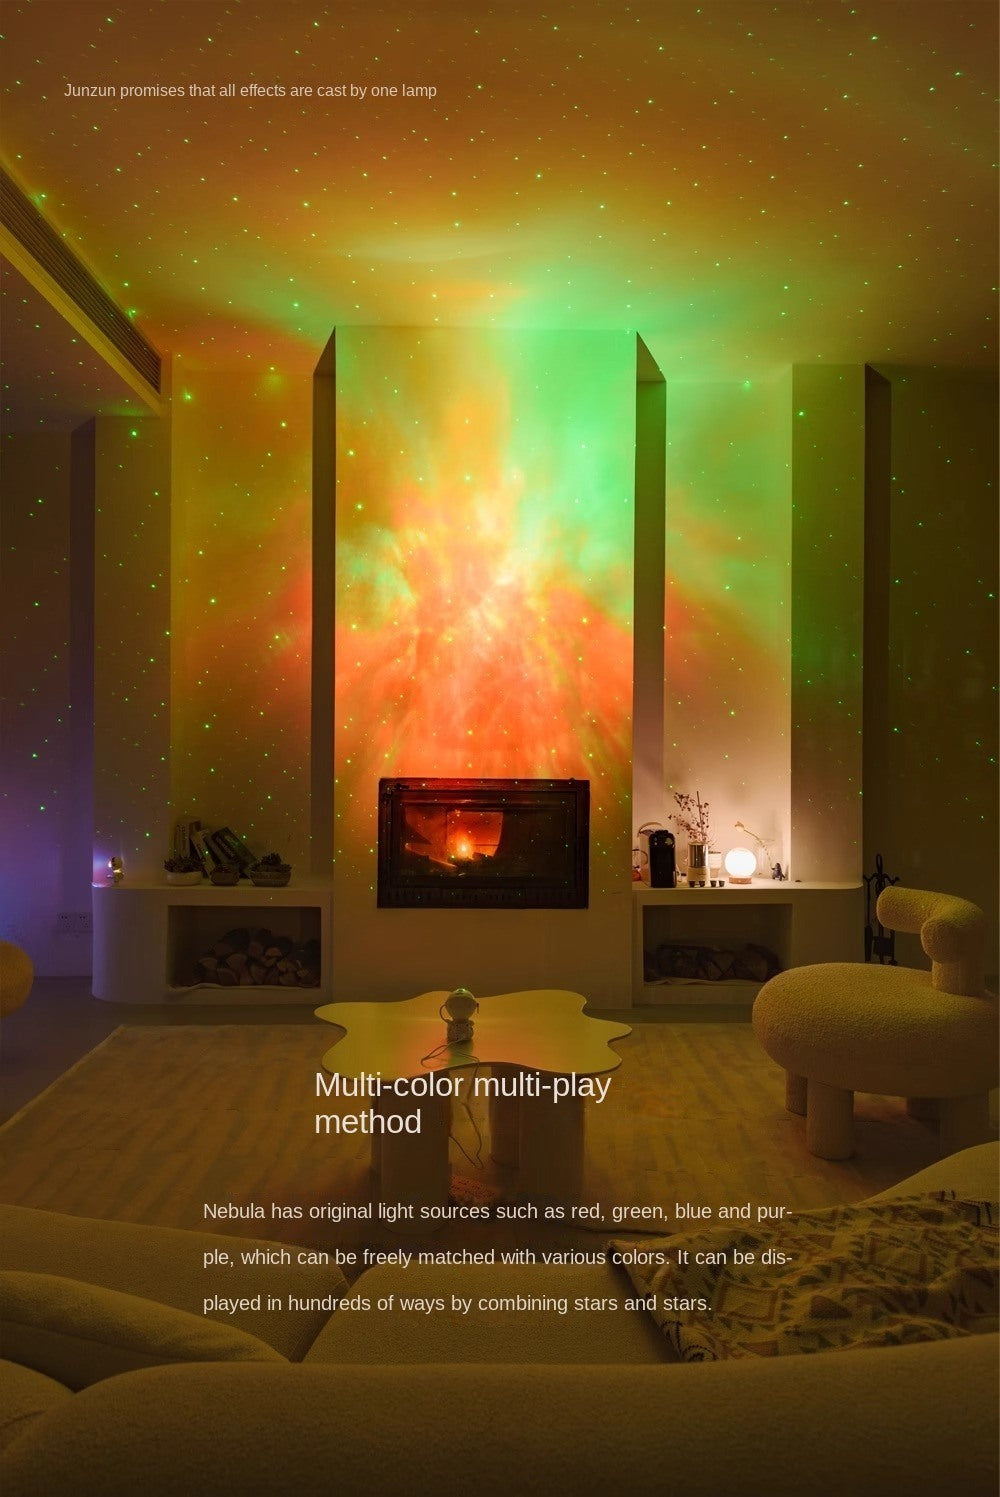 Astronaut Galaxy Projector, Star Projector Galaxy Night Light - Astronaut Light Projector, Starry Nebula Ceiling LED Lamp with Remote Control,